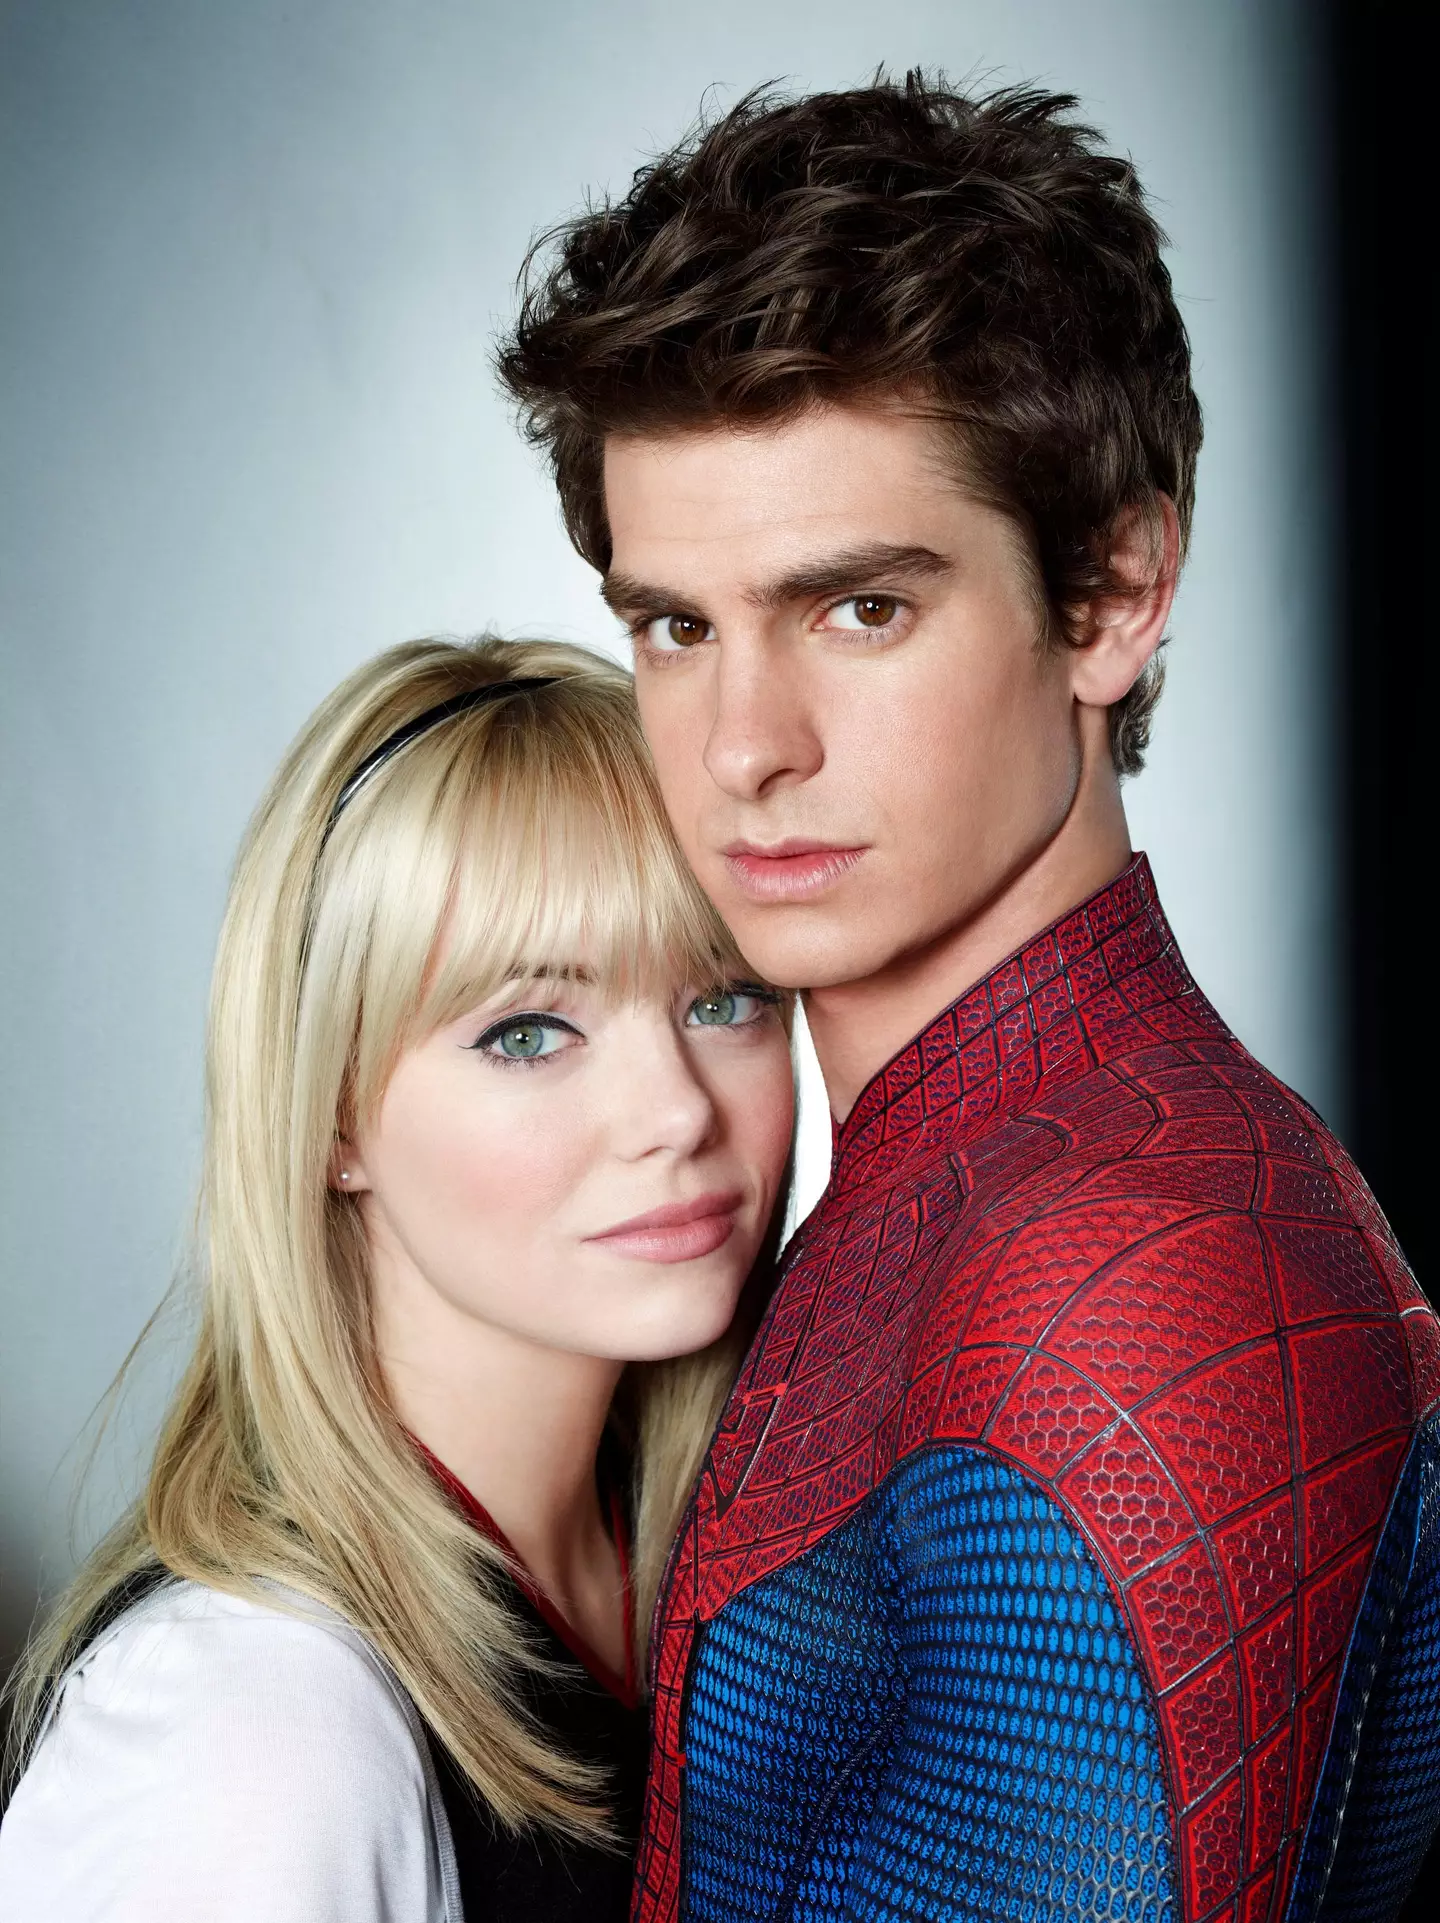 Emma Stone starred in Spider-Man with Garfield.